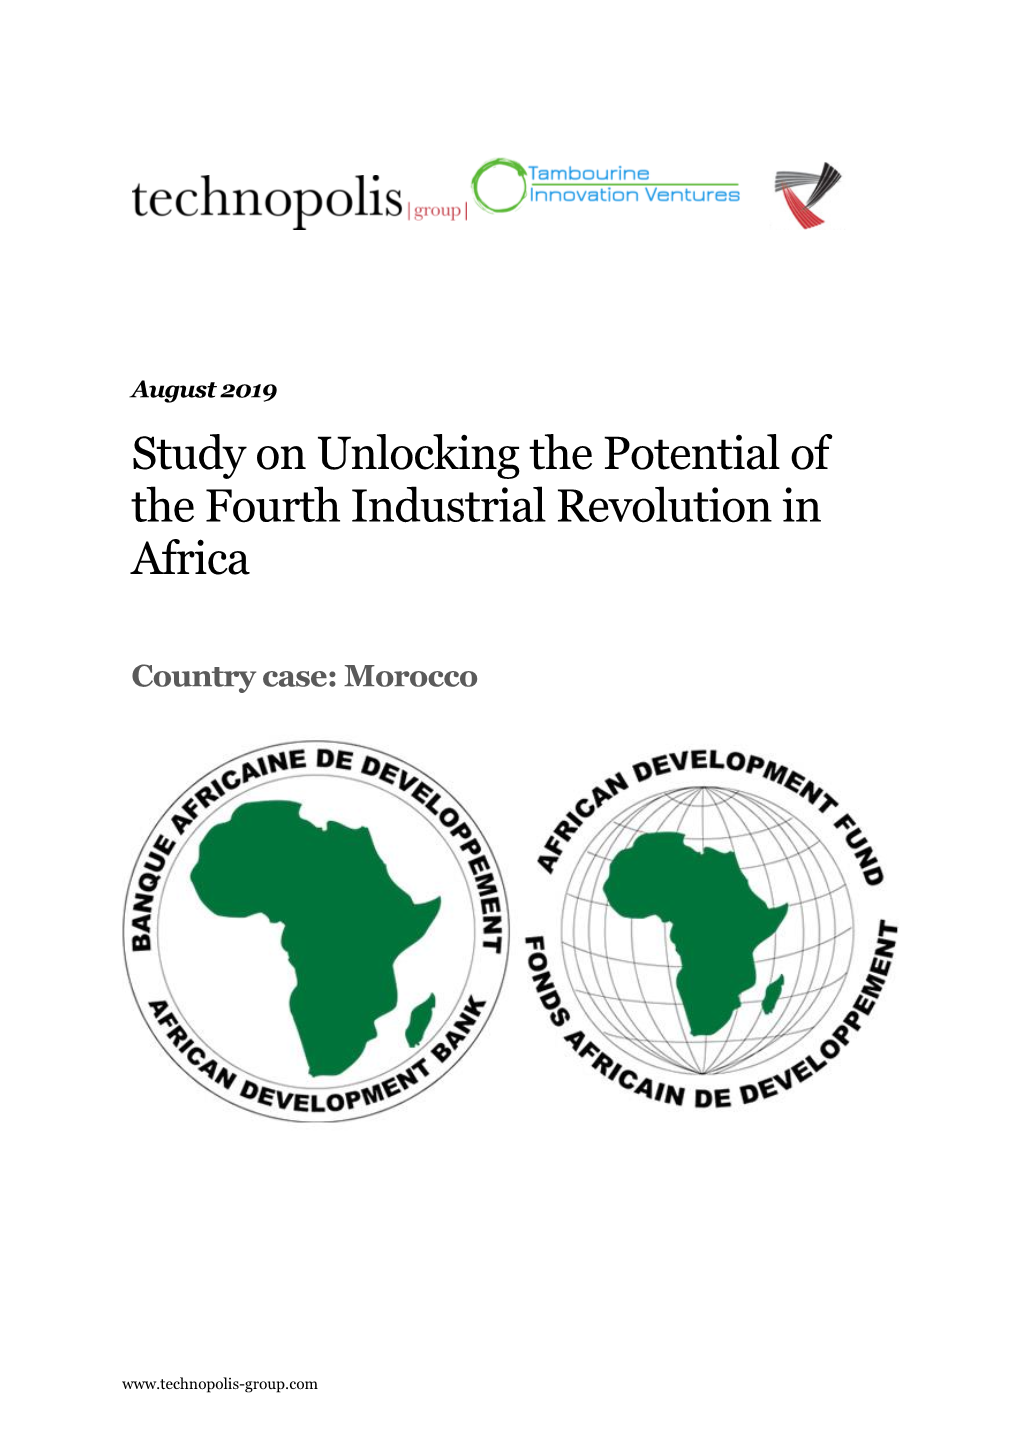 Study on Unlocking the Potential of the Fourth Industrial Revolution in Africa